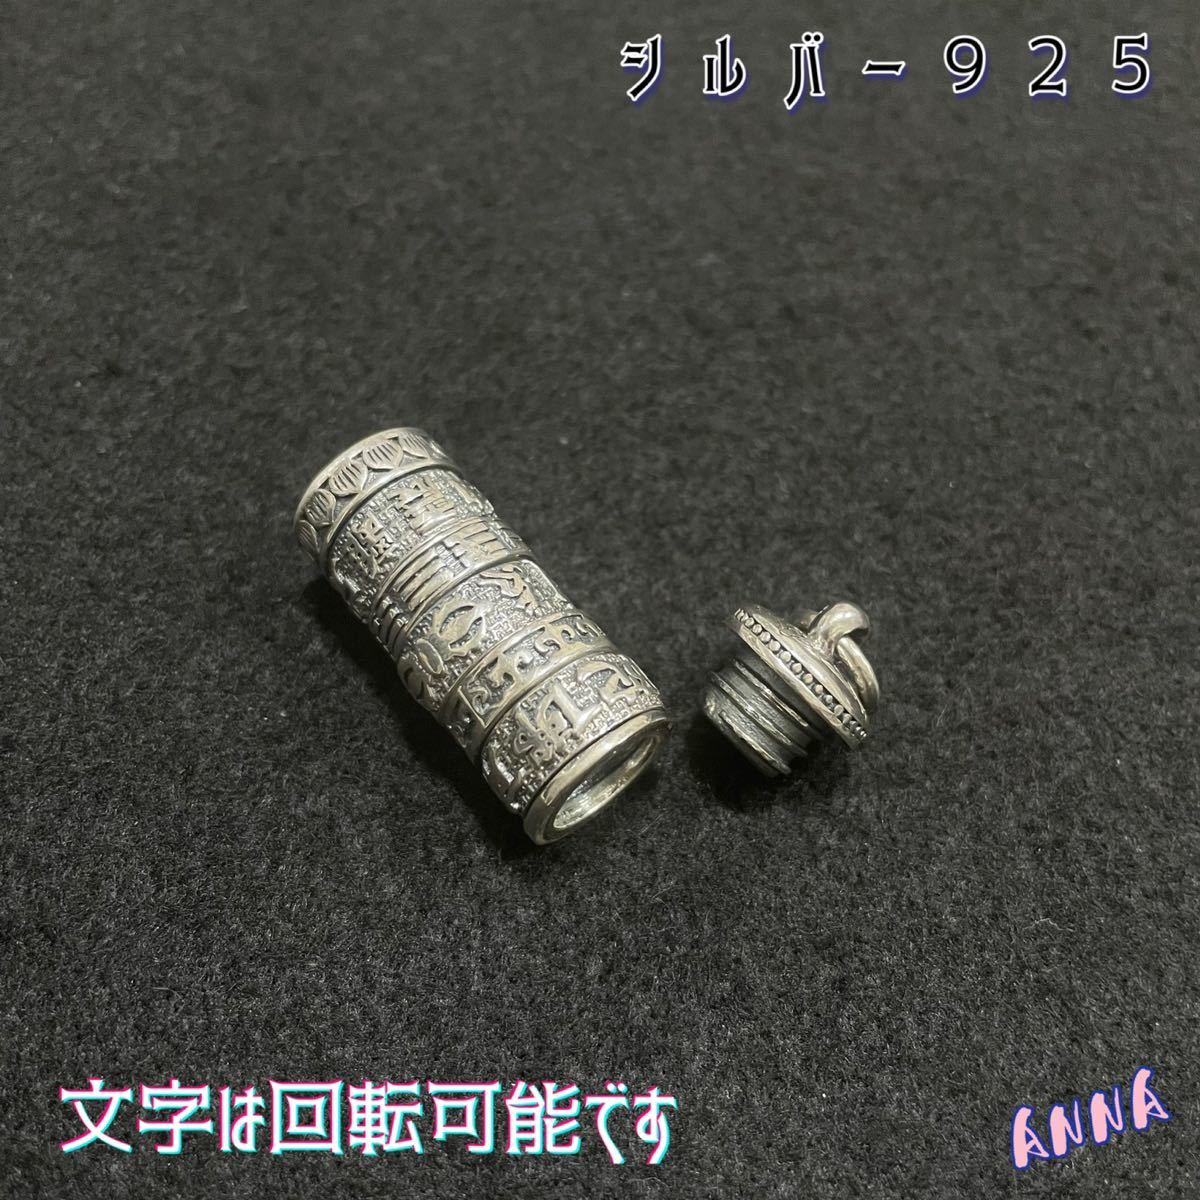  silver 925 character is rotation possibility . writing . character . writing god . medicine bin multifunction top lotus silver made pendant top Capsule type bad avoid key holder s4